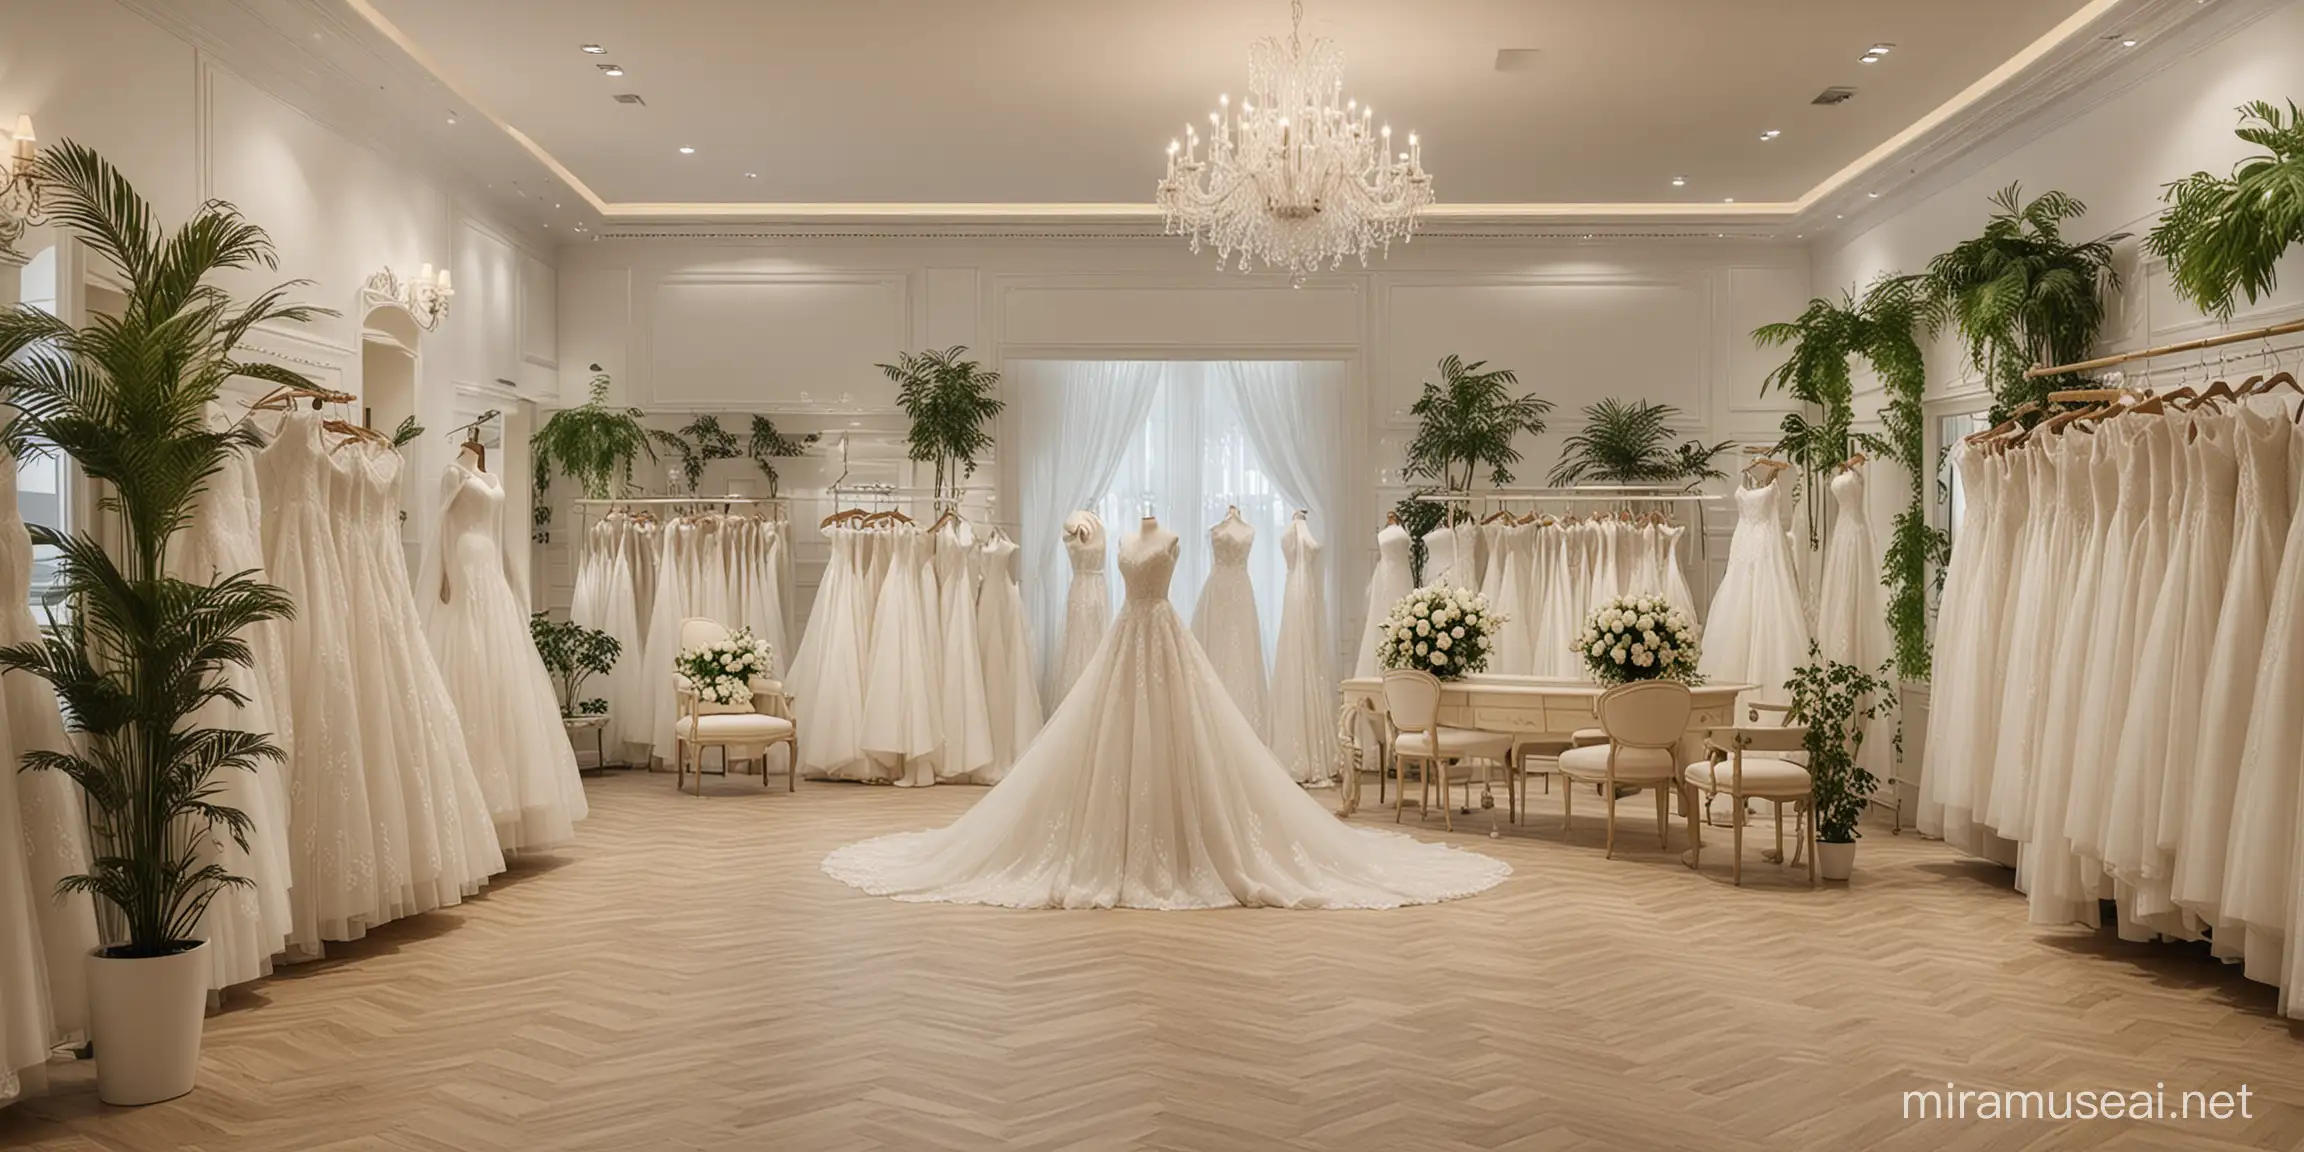  realistic luxurious  Elegant & Classic Wedding Dress Store Design
need a welcome desk area
need a seating area
need an area that we need to use for photo of the bride purchased the gown.
enhance current area for fittings.
can move or build more dress hangers.
with small plants